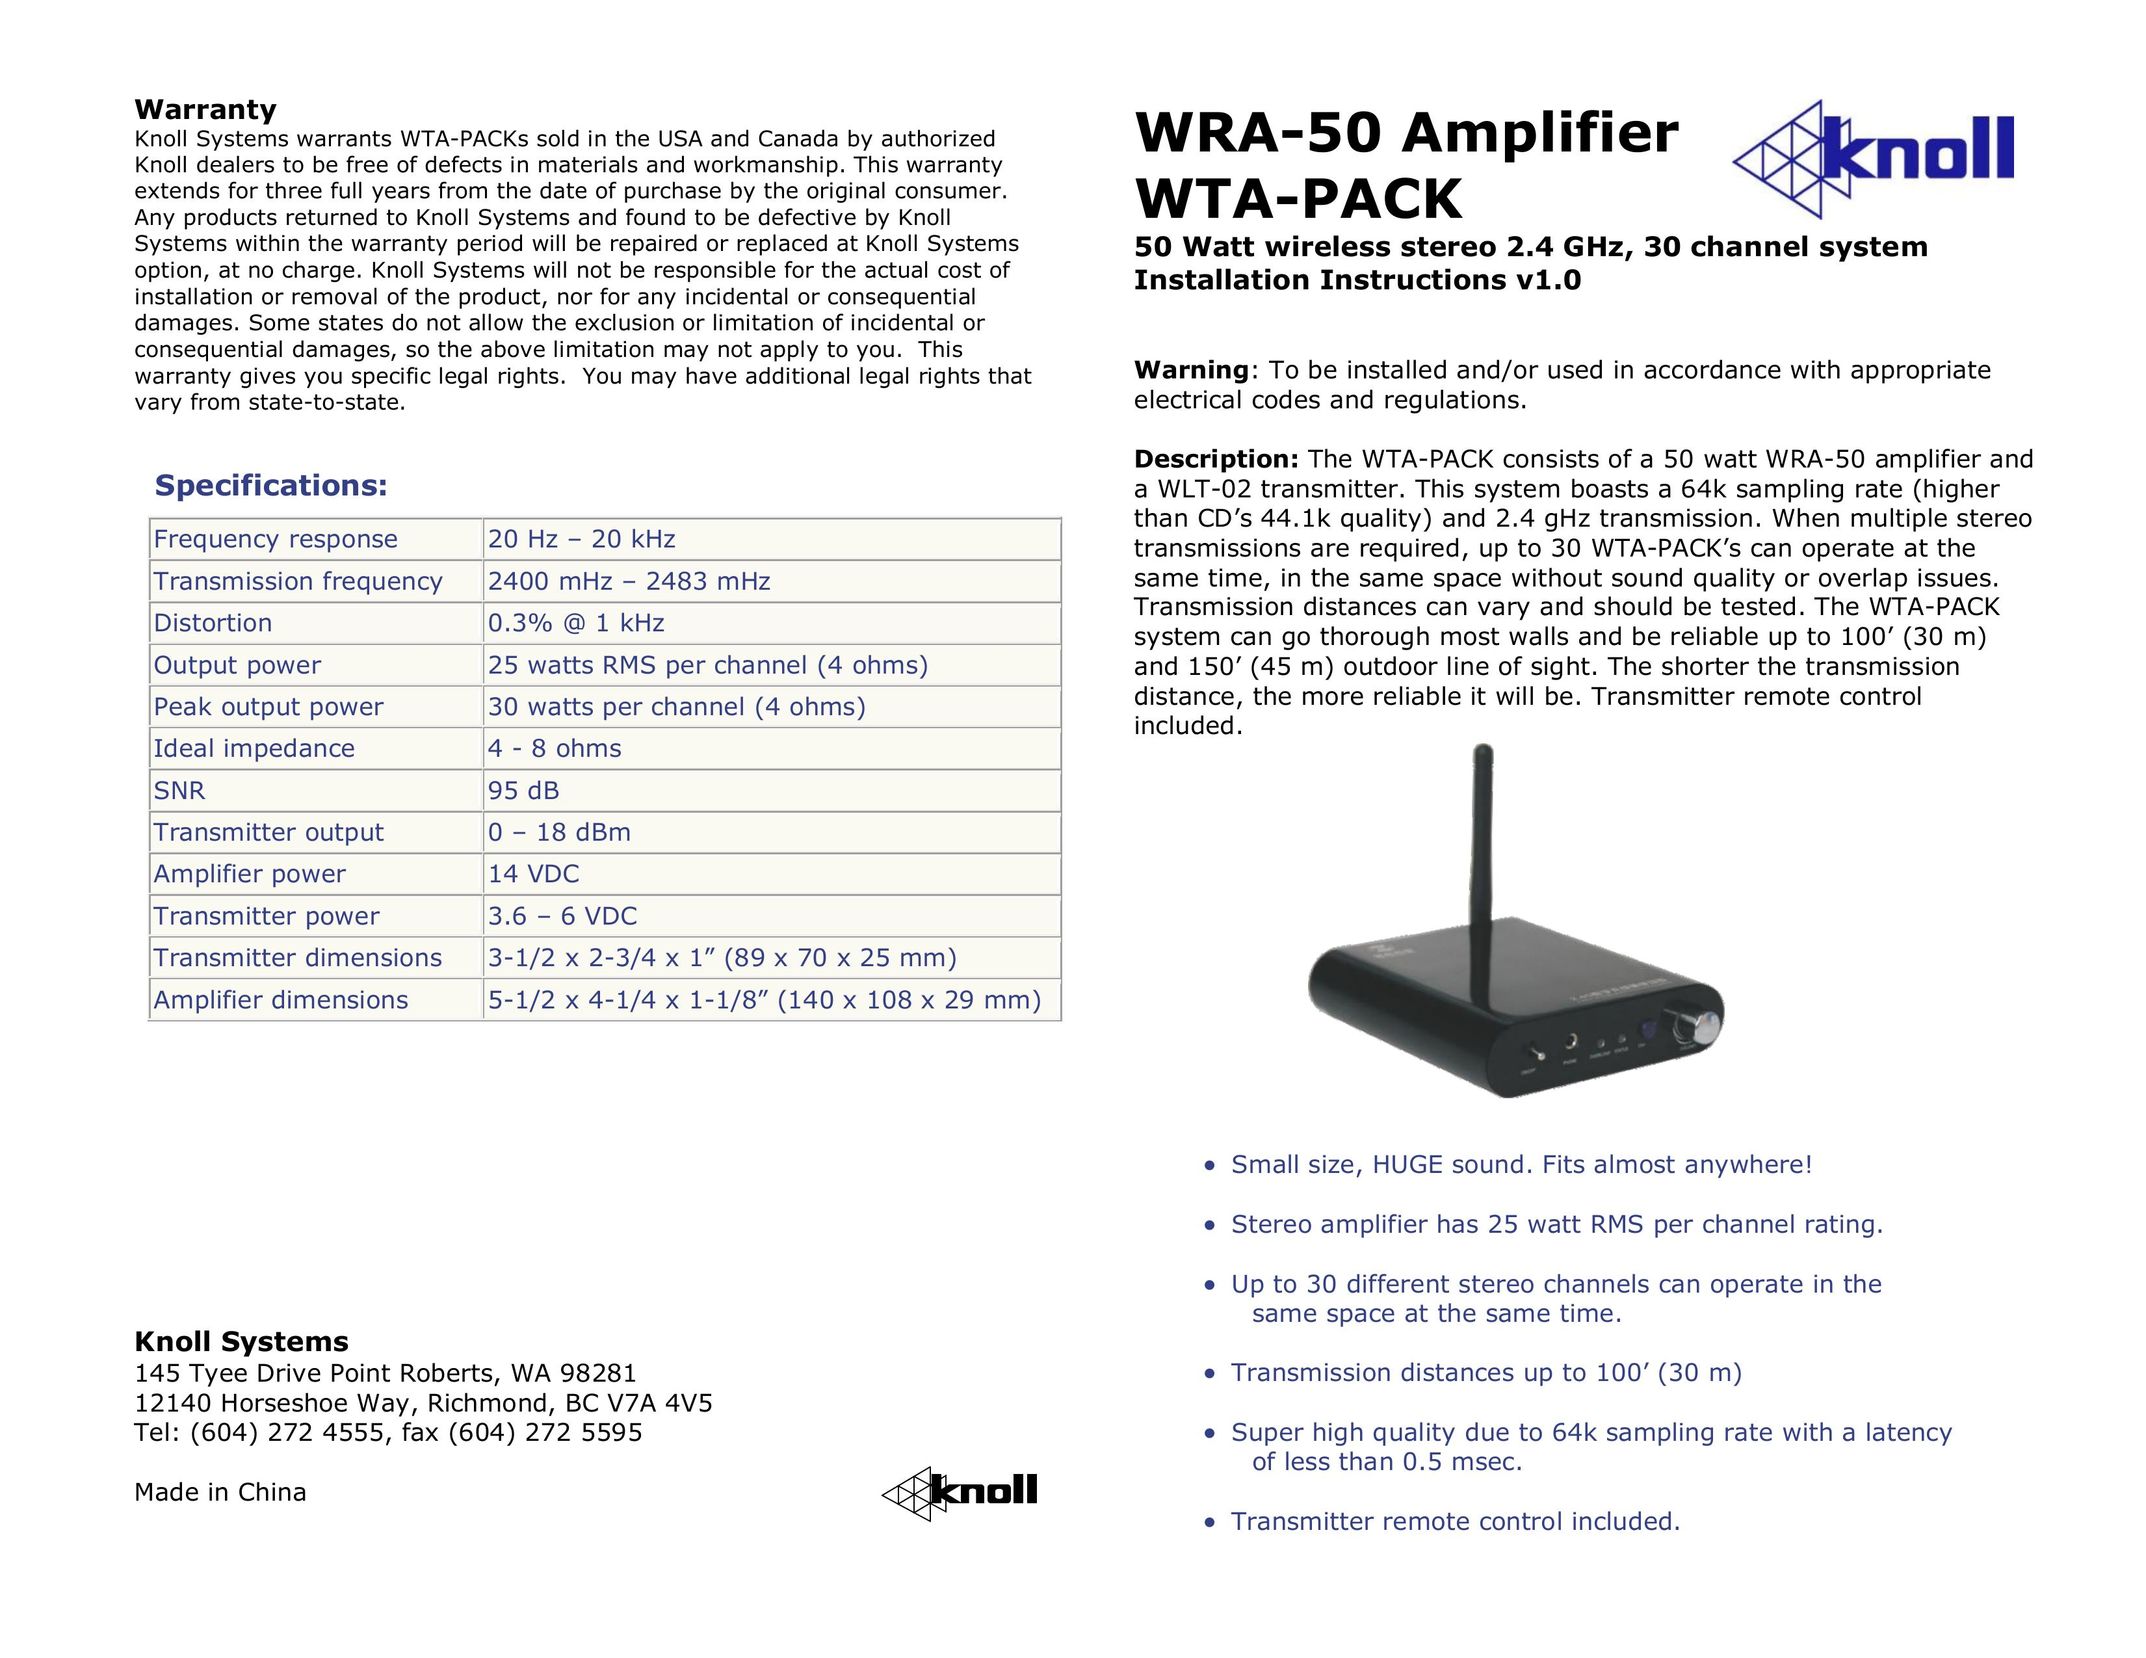 Knoll Systems WRA-50 Network Hardware User Manual